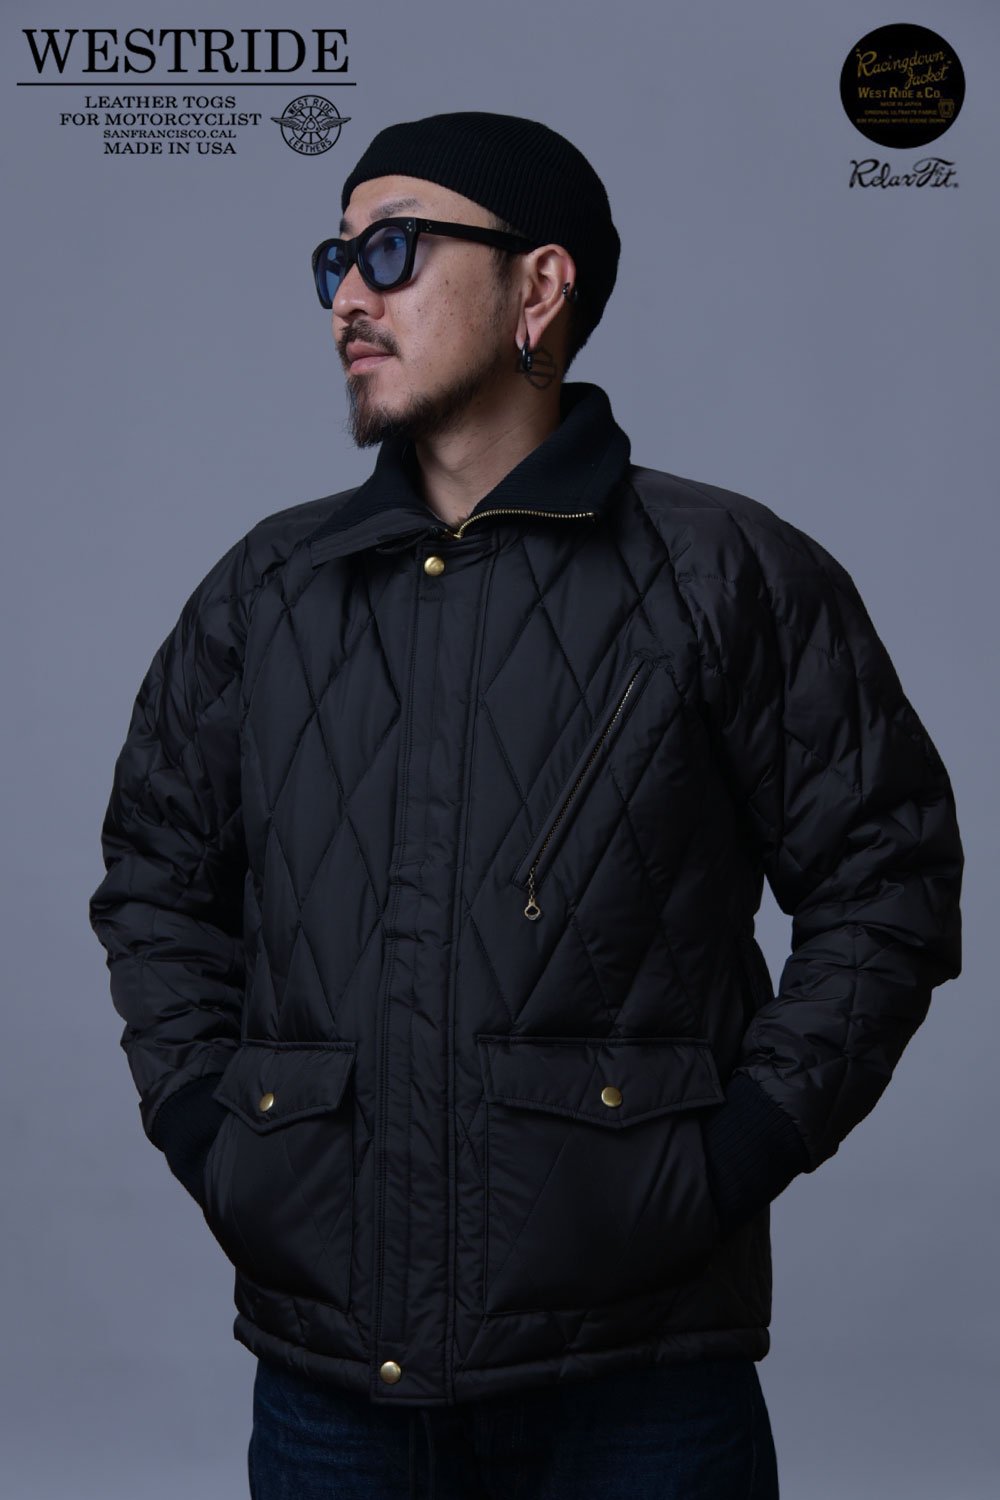 WESTRIDE(ウエストライド) レーシングダウンジャケット ALL NEW RACING DOWN JKT2 RELAX FIT/PLD  HJW-02RF 通販正規取扱 | ハーレムストア公式通販サイト